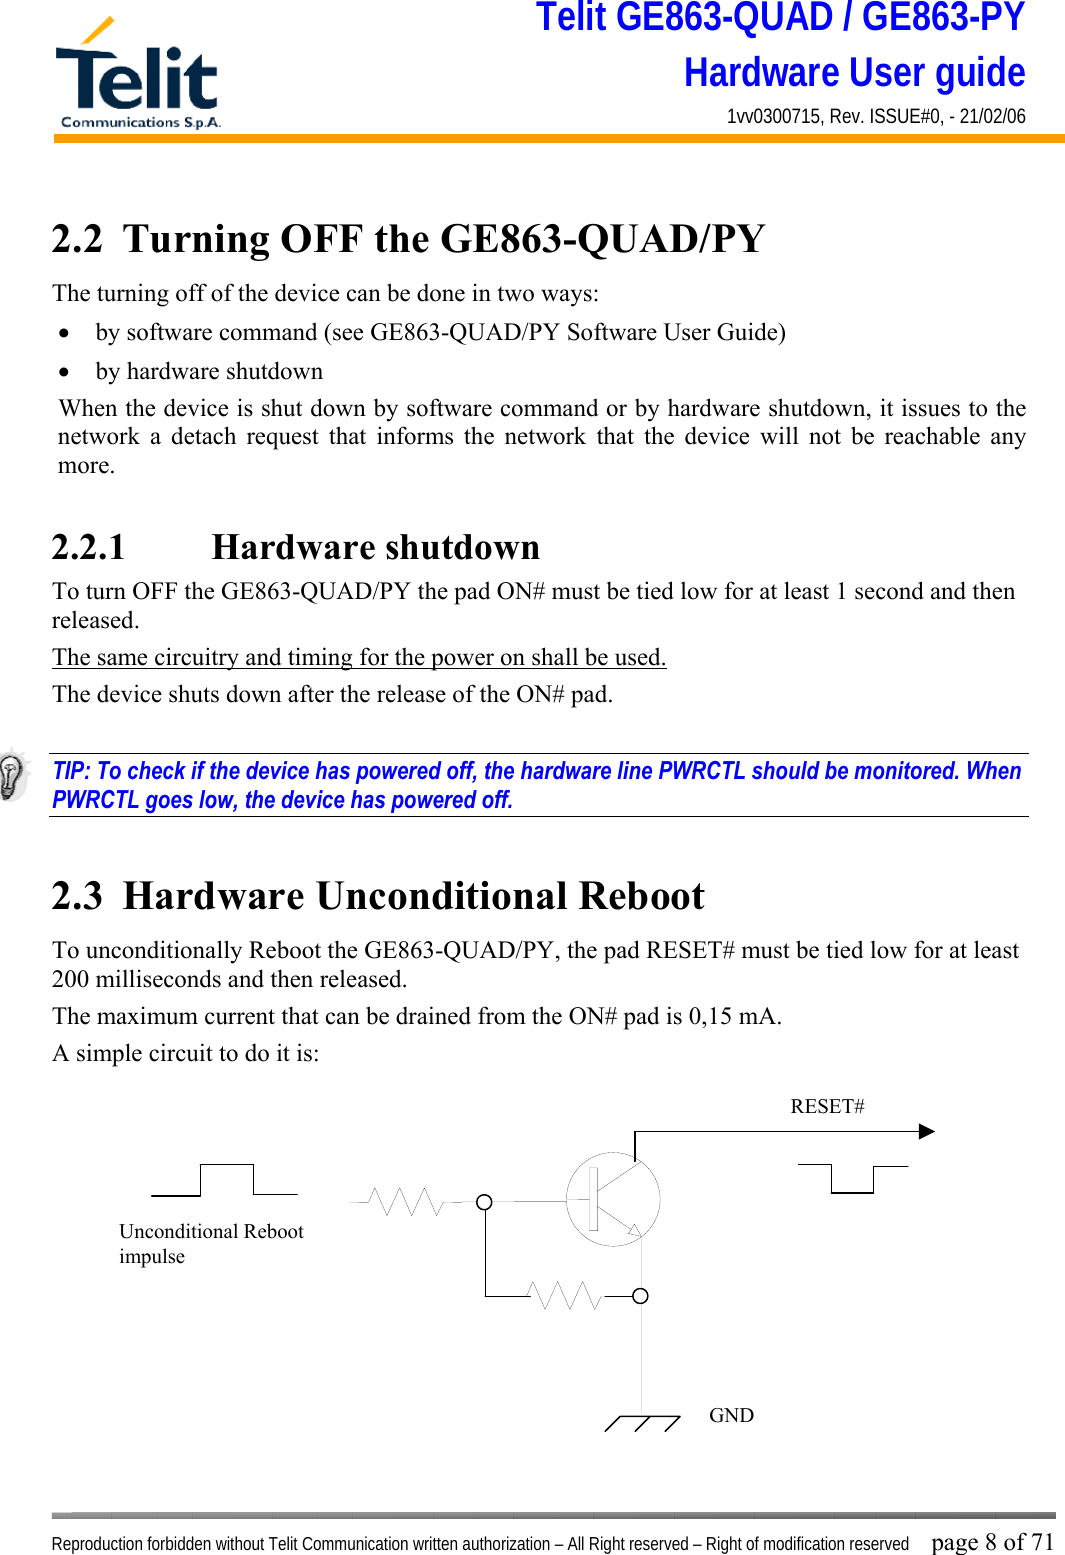 Telit GE863-QUAD / GE863-PY Hardware User guide 1vv0300715, Rev. ISSUE#0, - 21/02/06    Reproduction forbidden without Telit Communication written authorization – All Right reserved – Right of modification reserved page 8 of 71 2.2  Turning OFF the GE863-QUAD/PY The turning off of the device can be done in two ways: •  by software command (see GE863-QUAD/PY Software User Guide) •  by hardware shutdown When the device is shut down by software command or by hardware shutdown, it issues to the network a detach request that informs the network that the device will not be reachable any more.   2.2.1    Hardware shutdown To turn OFF the GE863-QUAD/PY the pad ON# must be tied low for at least 1 second and then released. The same circuitry and timing for the power on shall be used. The device shuts down after the release of the ON# pad.  TIP: To check if the device has powered off, the hardware line PWRCTL should be monitored. When PWRCTL goes low, the device has powered off.  2.3  Hardware Unconditional Reboot To unconditionally Reboot the GE863-QUAD/PY, the pad RESET# must be tied low for at least 200 milliseconds and then released. The maximum current that can be drained from the ON# pad is 0,15 mA. A simple circuit to do it is:              RESET# Unconditional Reboot impulse   GND